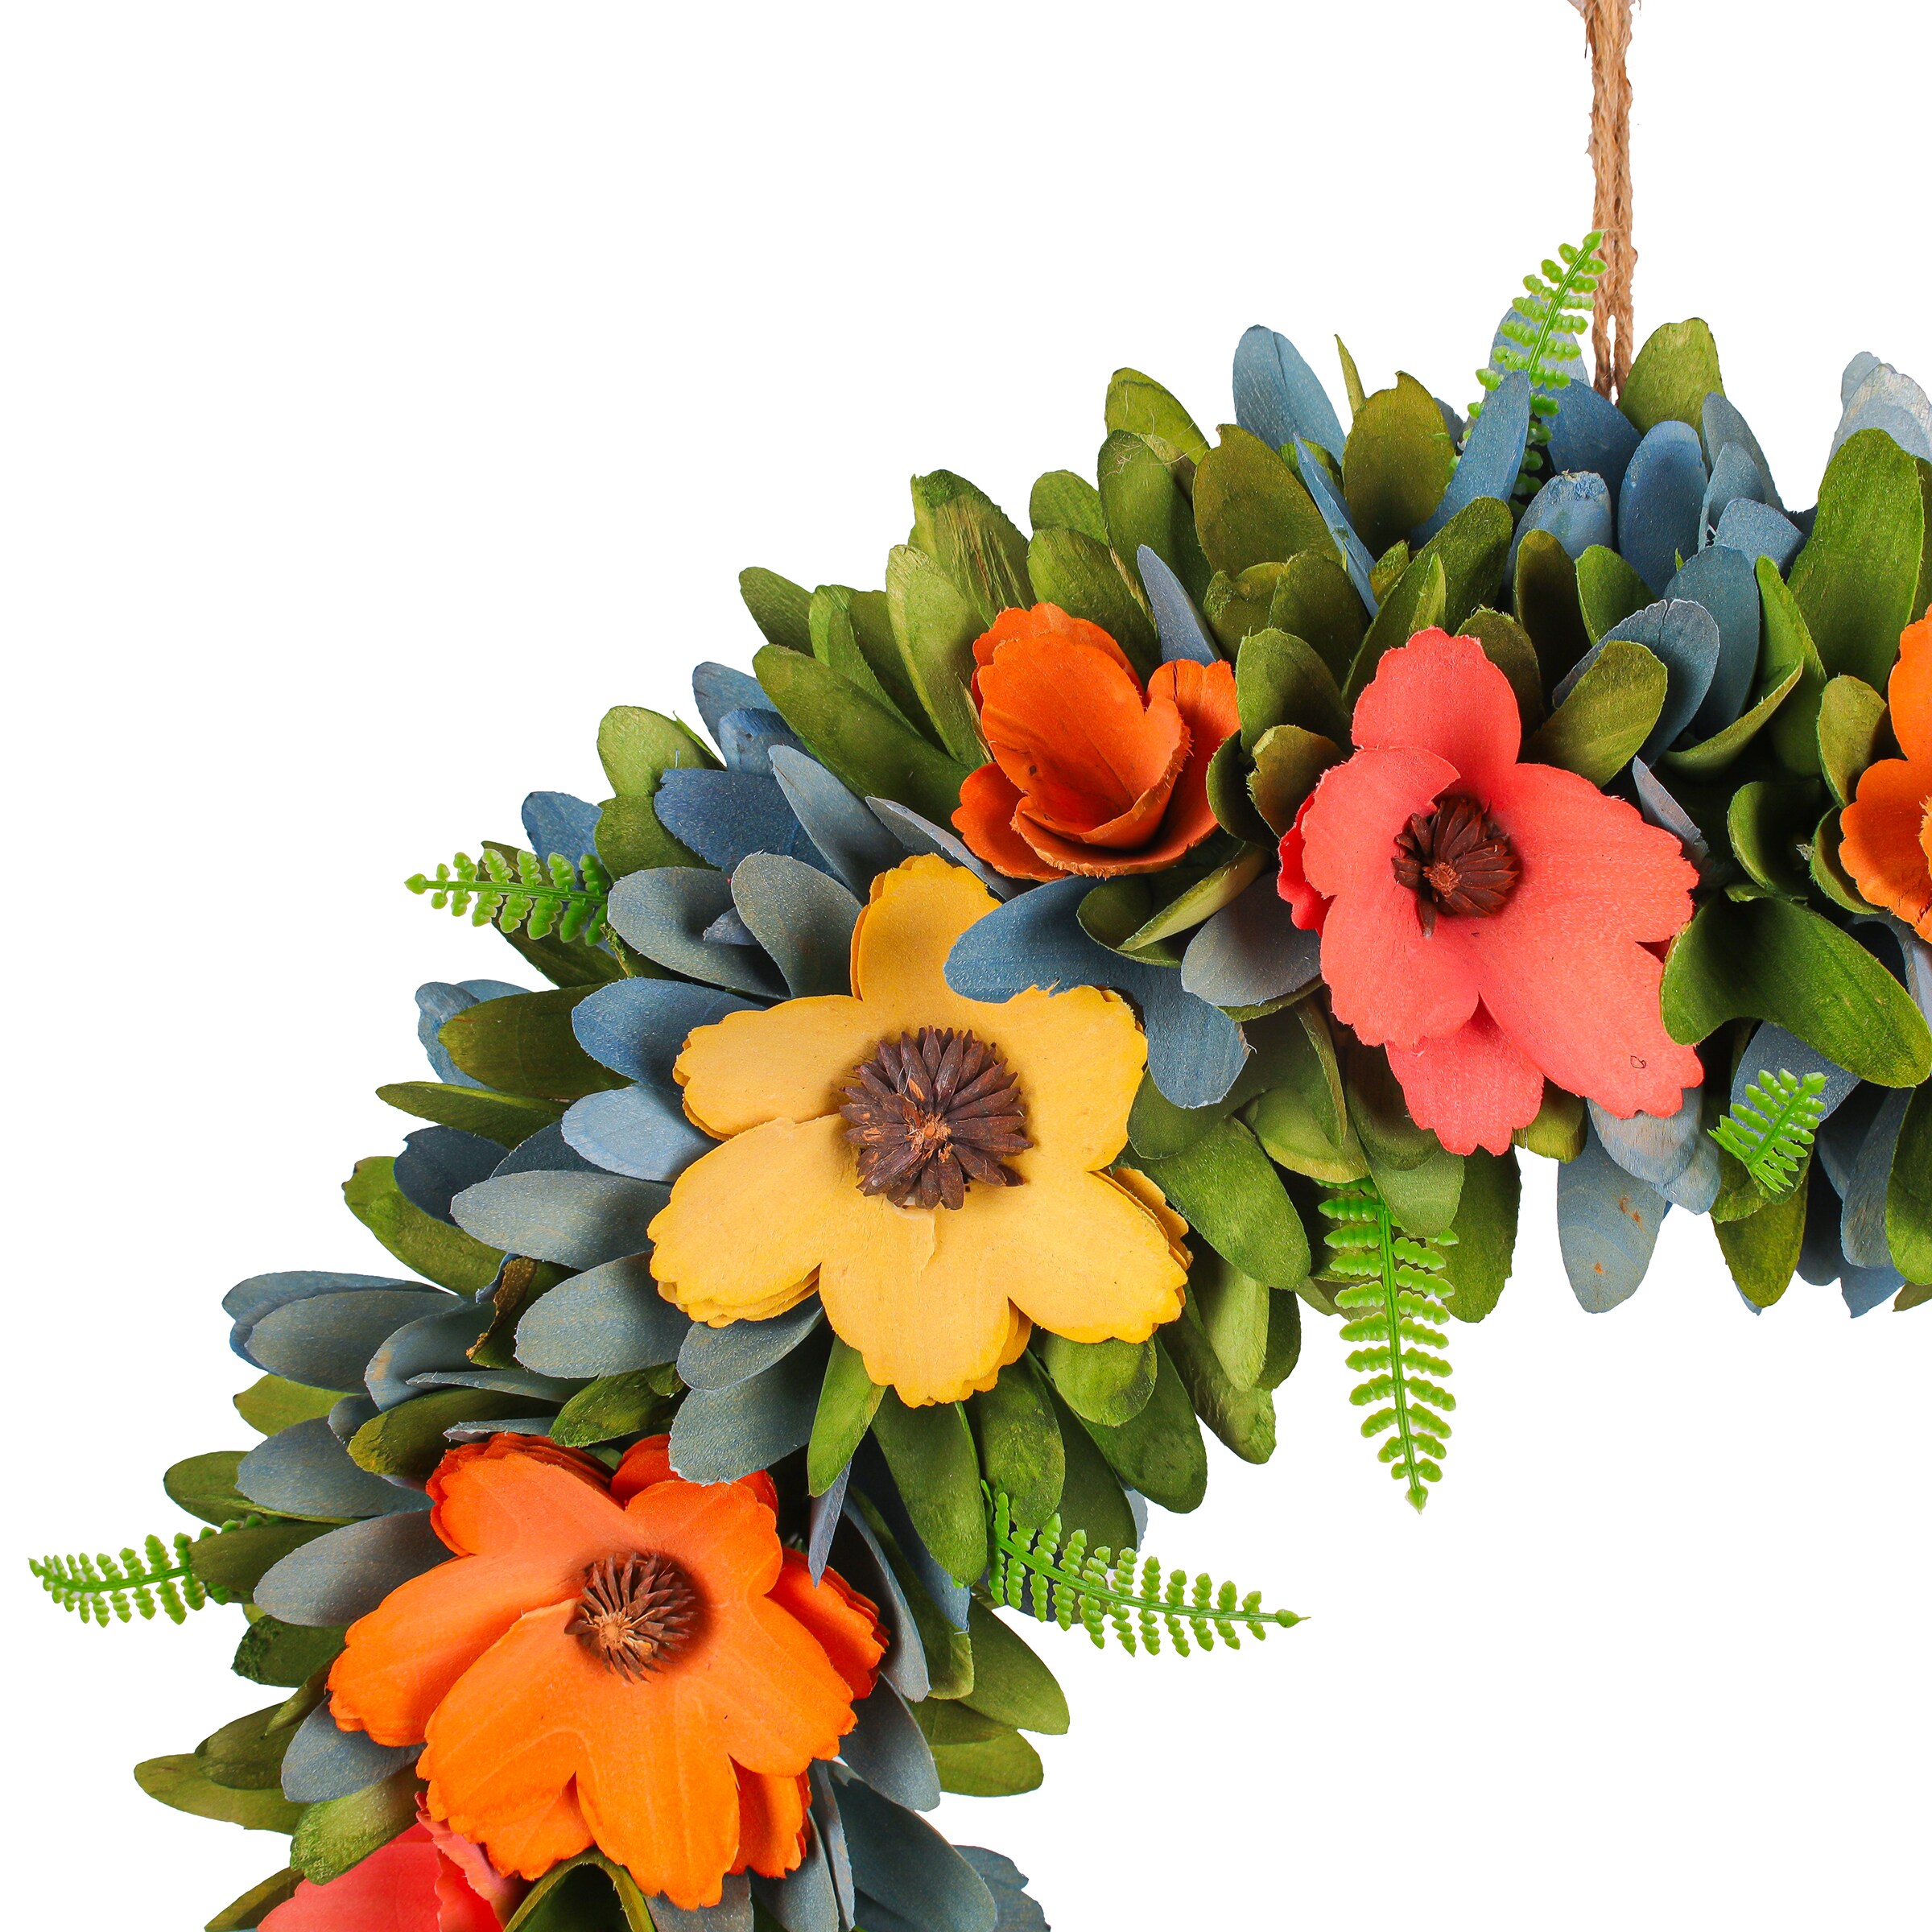 National Tree Company Hello Spring 18-in Green Boxwood Foam Wreath for  Indoor or Outdoor Hanging Decoration in the Seasonal Decorations department  at